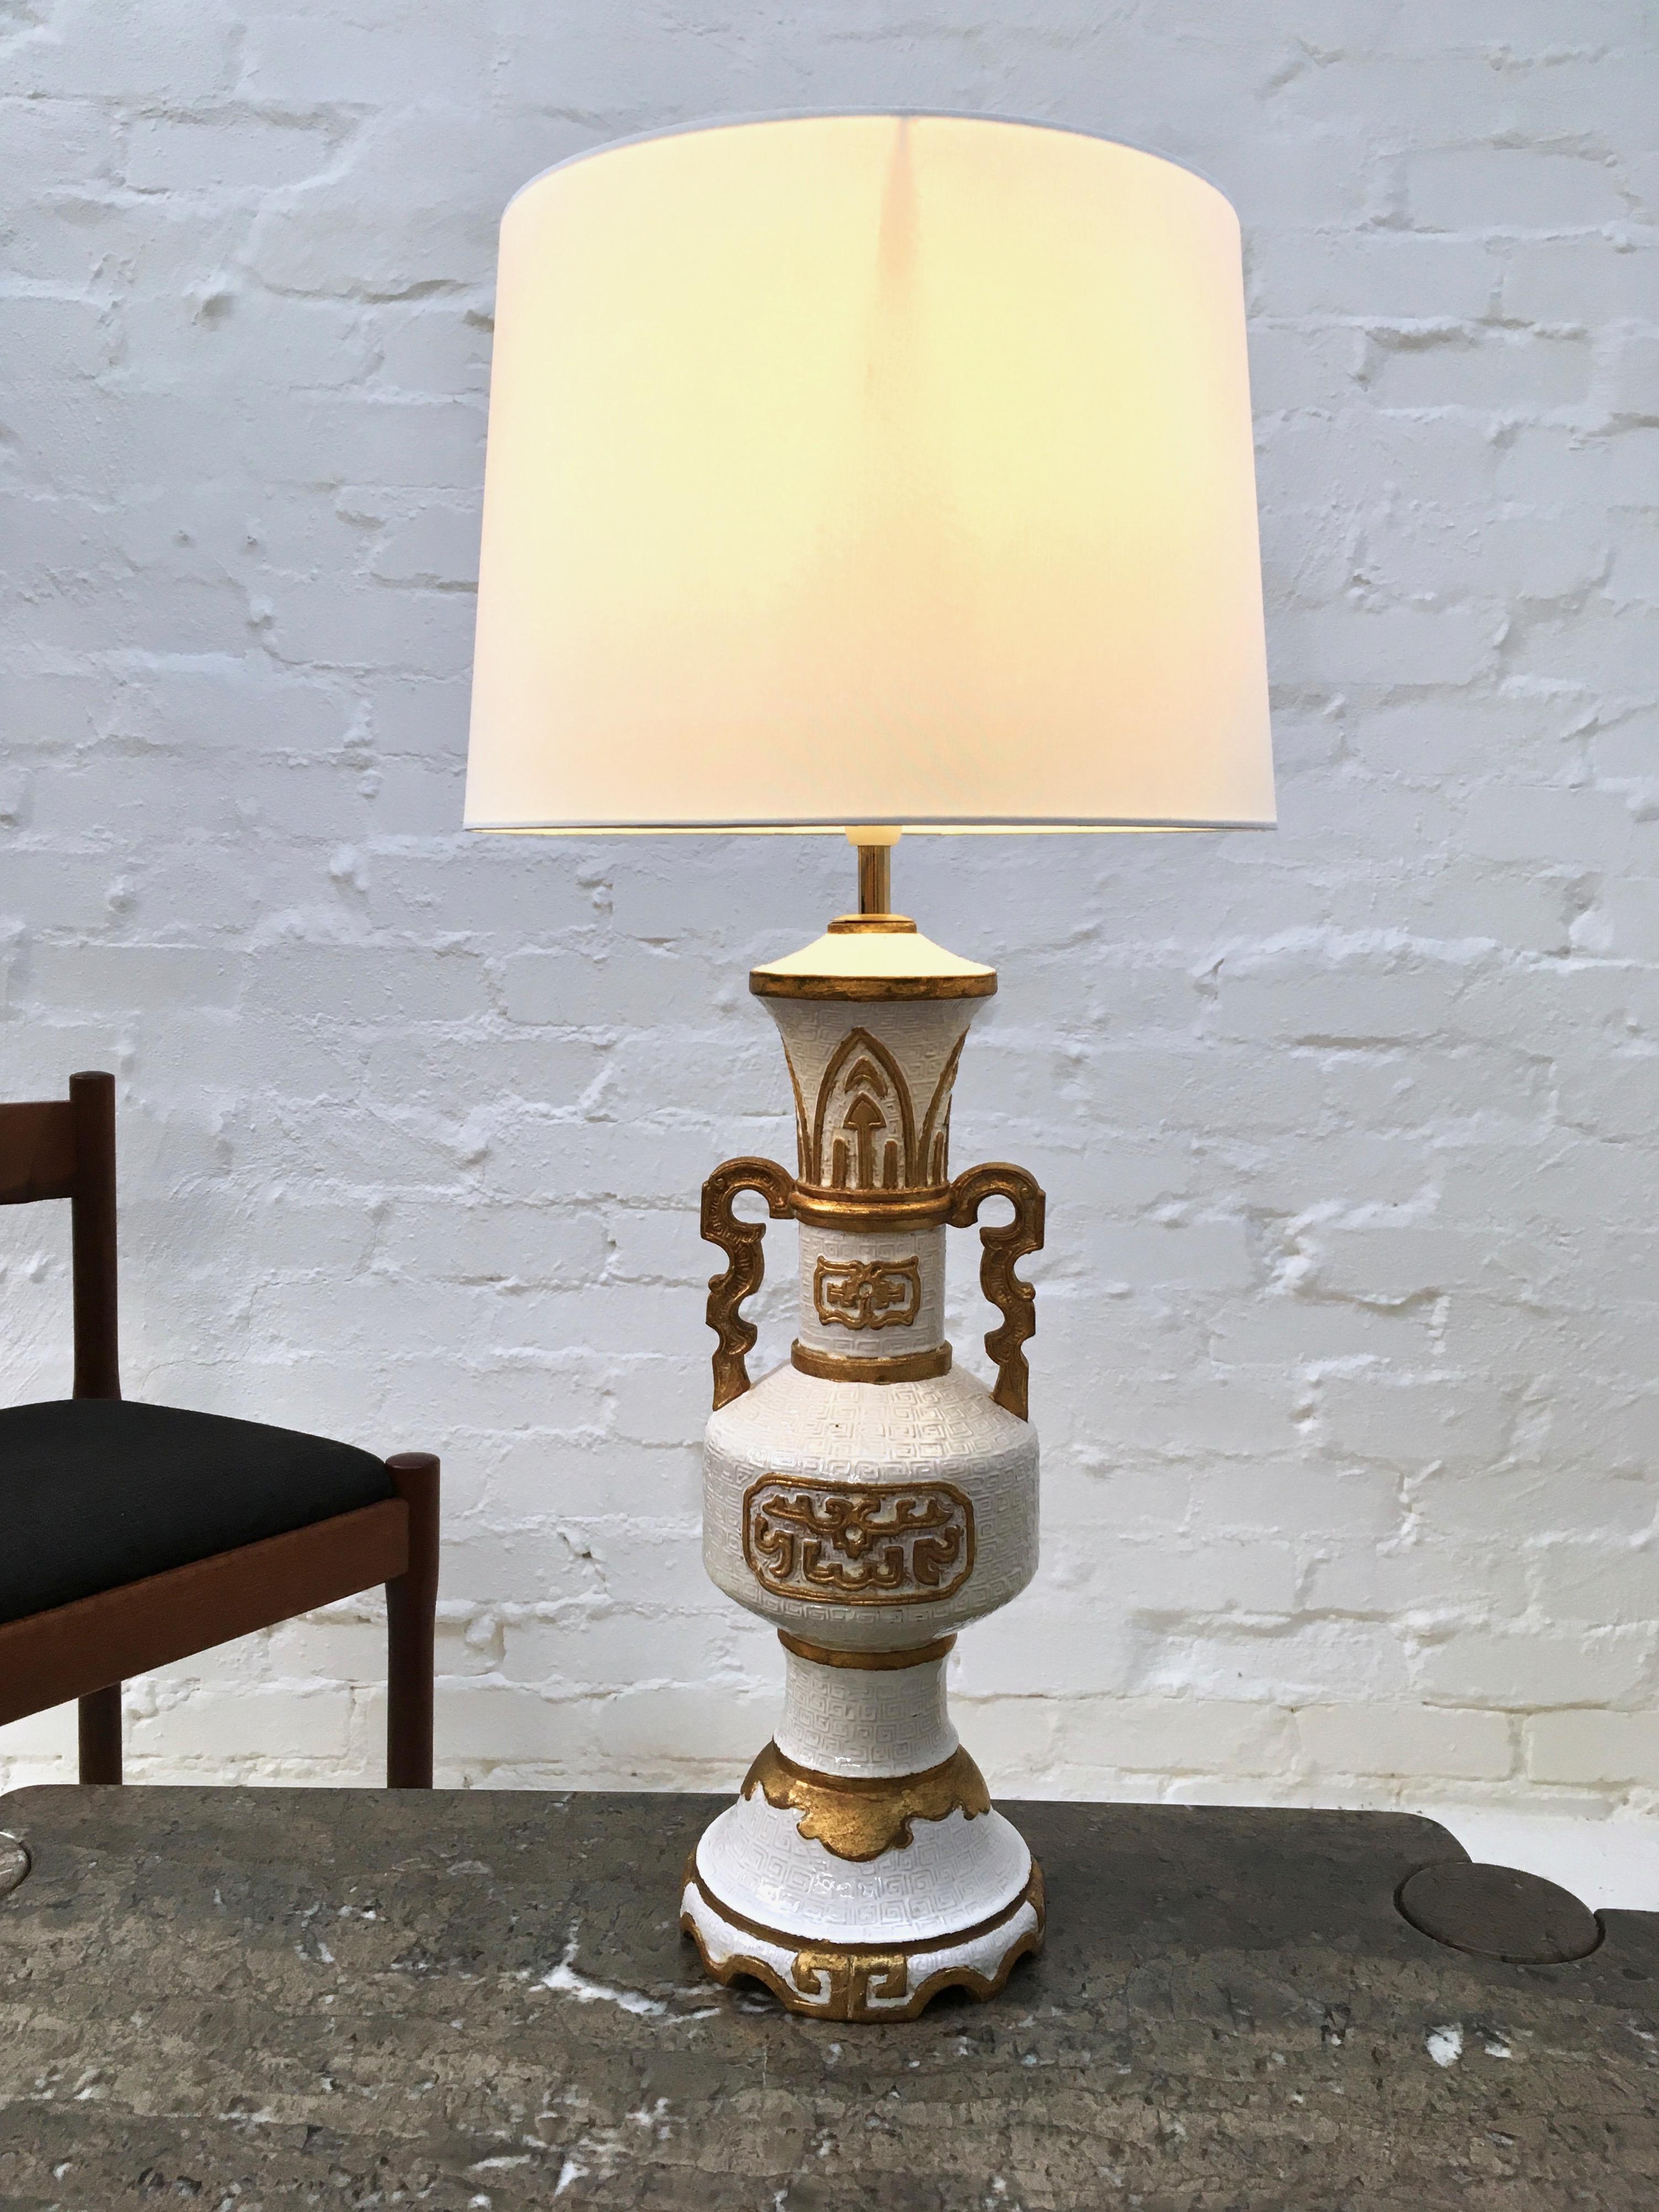 A large Hollywood Regency lamp with stylised decoration, standing 32 inches tall to the top of the shade. In keeping with the 1940s-1950s decorative style which saw large lamps move into the domestic market, this lamp is influenced by the scale and